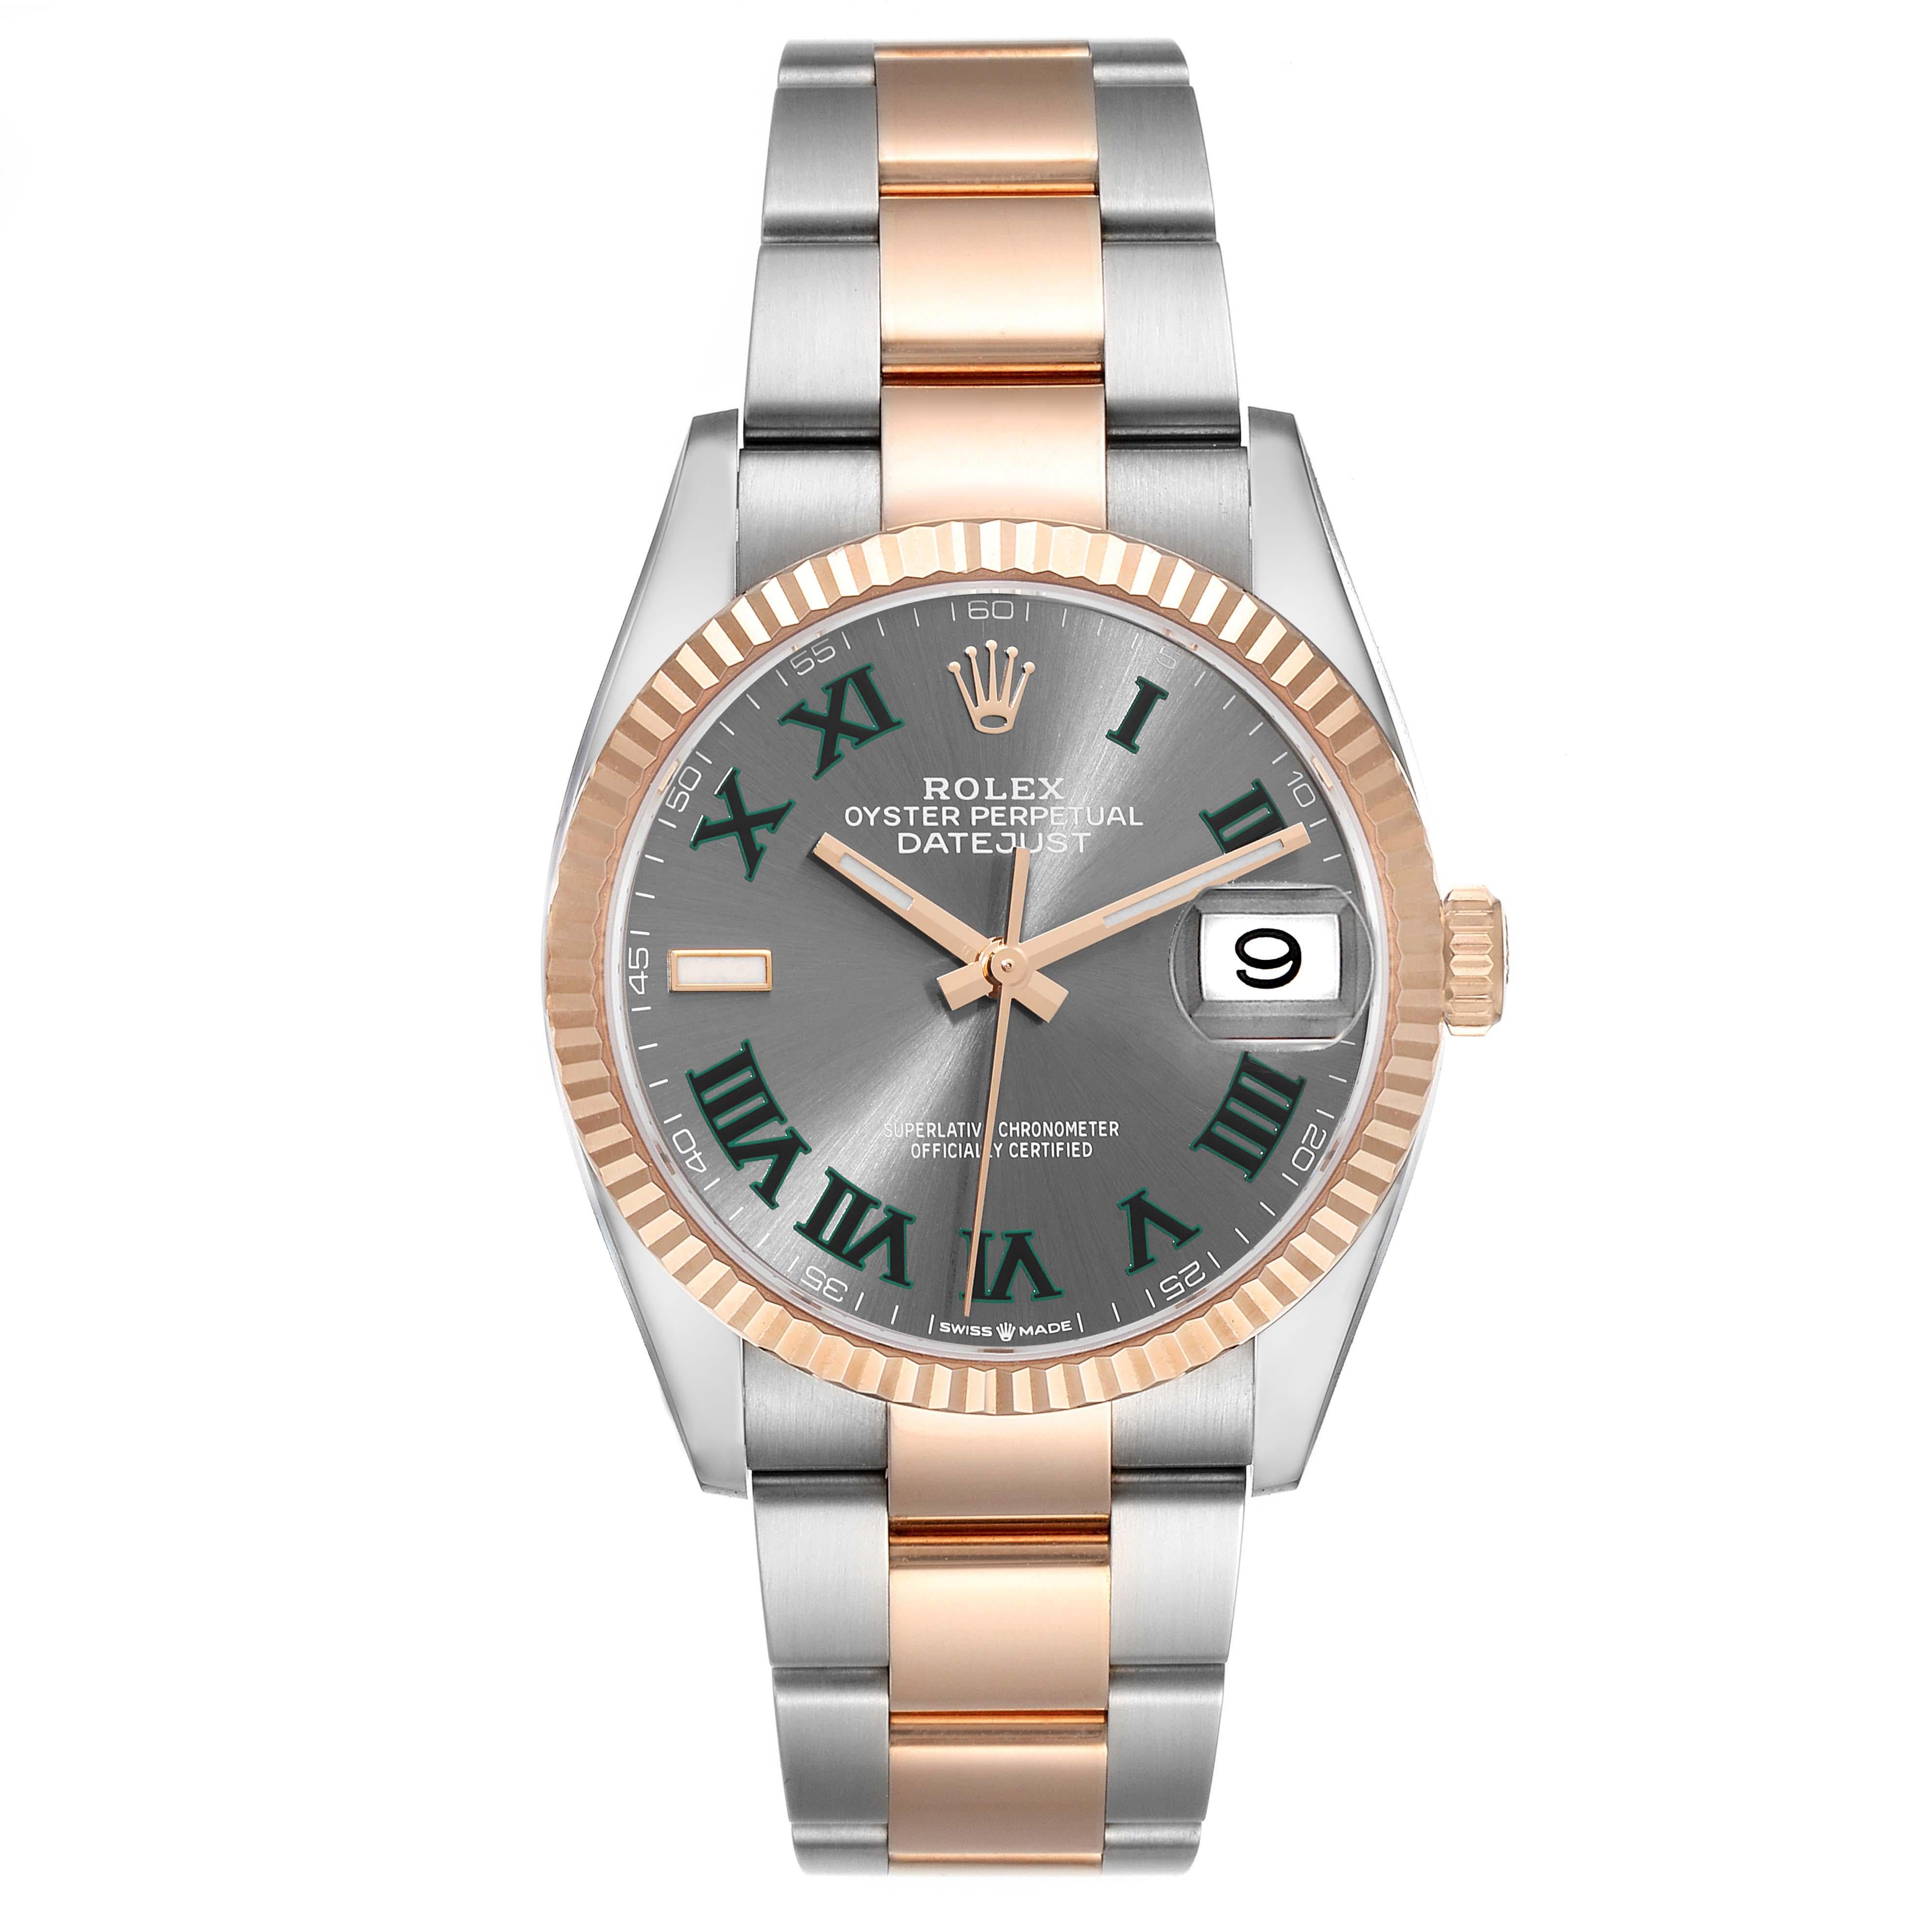 Rolex Datejust Wimbledon Dial Steel Rose Gold Mens Watch 126231 Unworn. Officially certified chronometer automatic self-winding movement. Stainless steel case 36.0 mm in diameter. High polished lugs. Rolex logo on an 18K rose gold crown. 18k rose